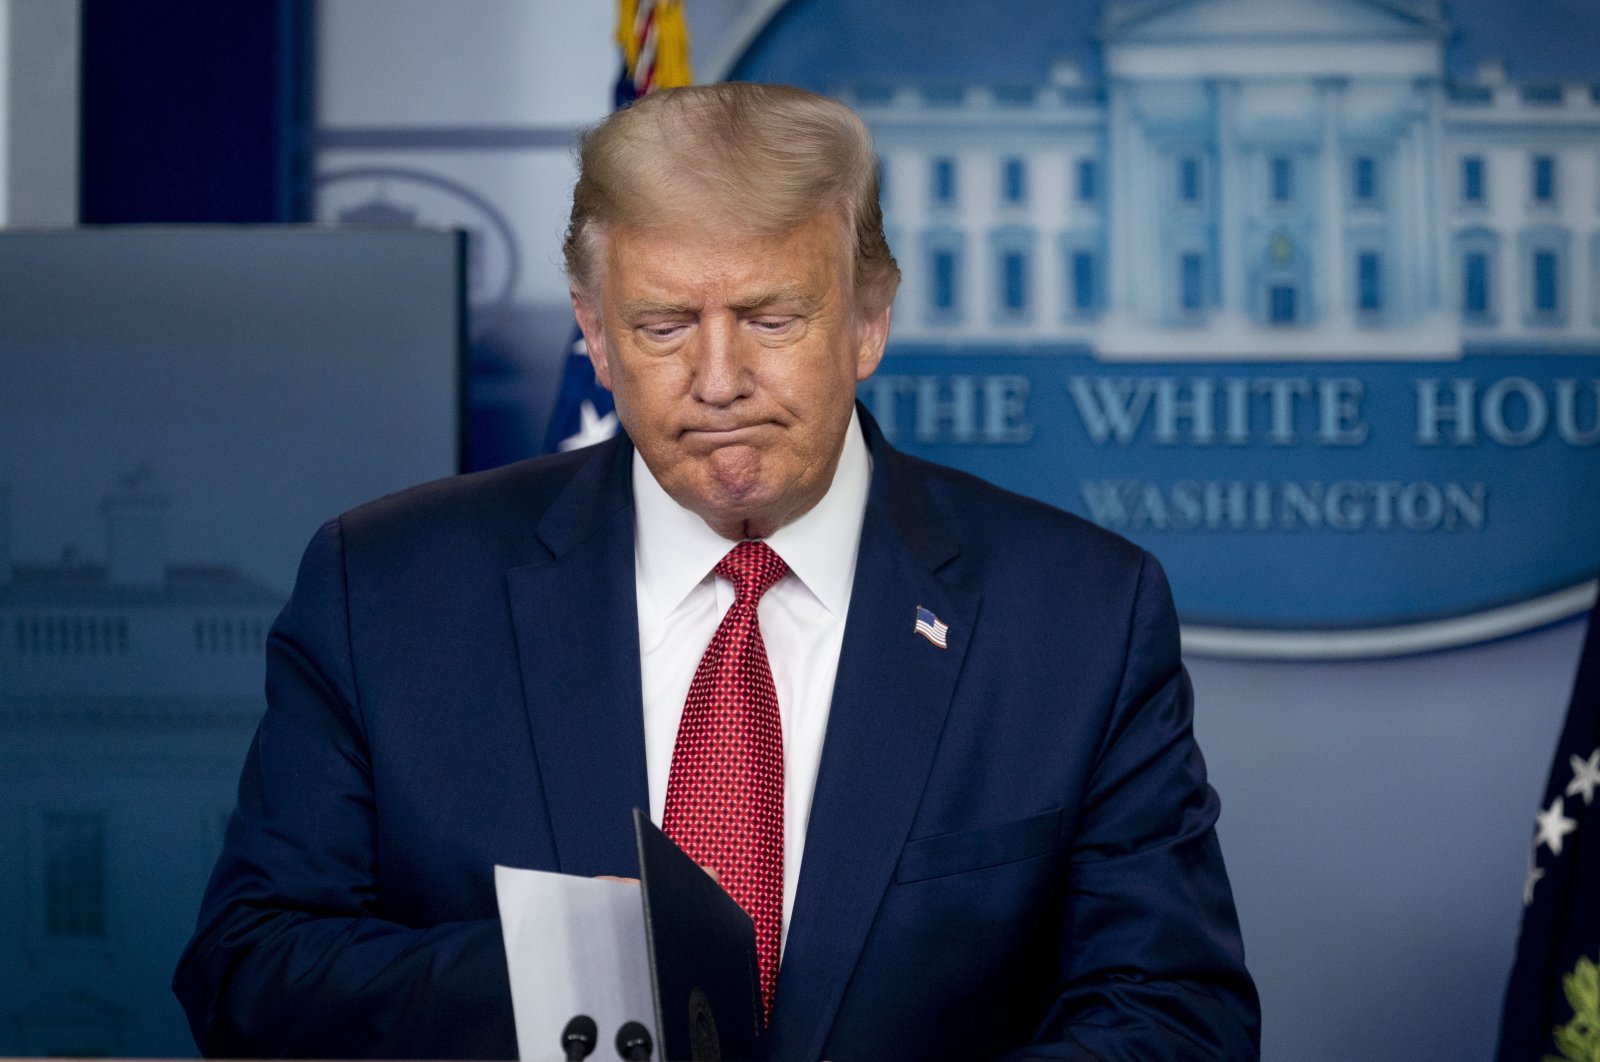 U.S. President Donald Trump returns to a news conference in the James Brady Press Briefing Room after he briefly left because of a security incident outside the fence of the White House in Washington, D.C., U.S., Aug. 10, 2020. (AP Photo)